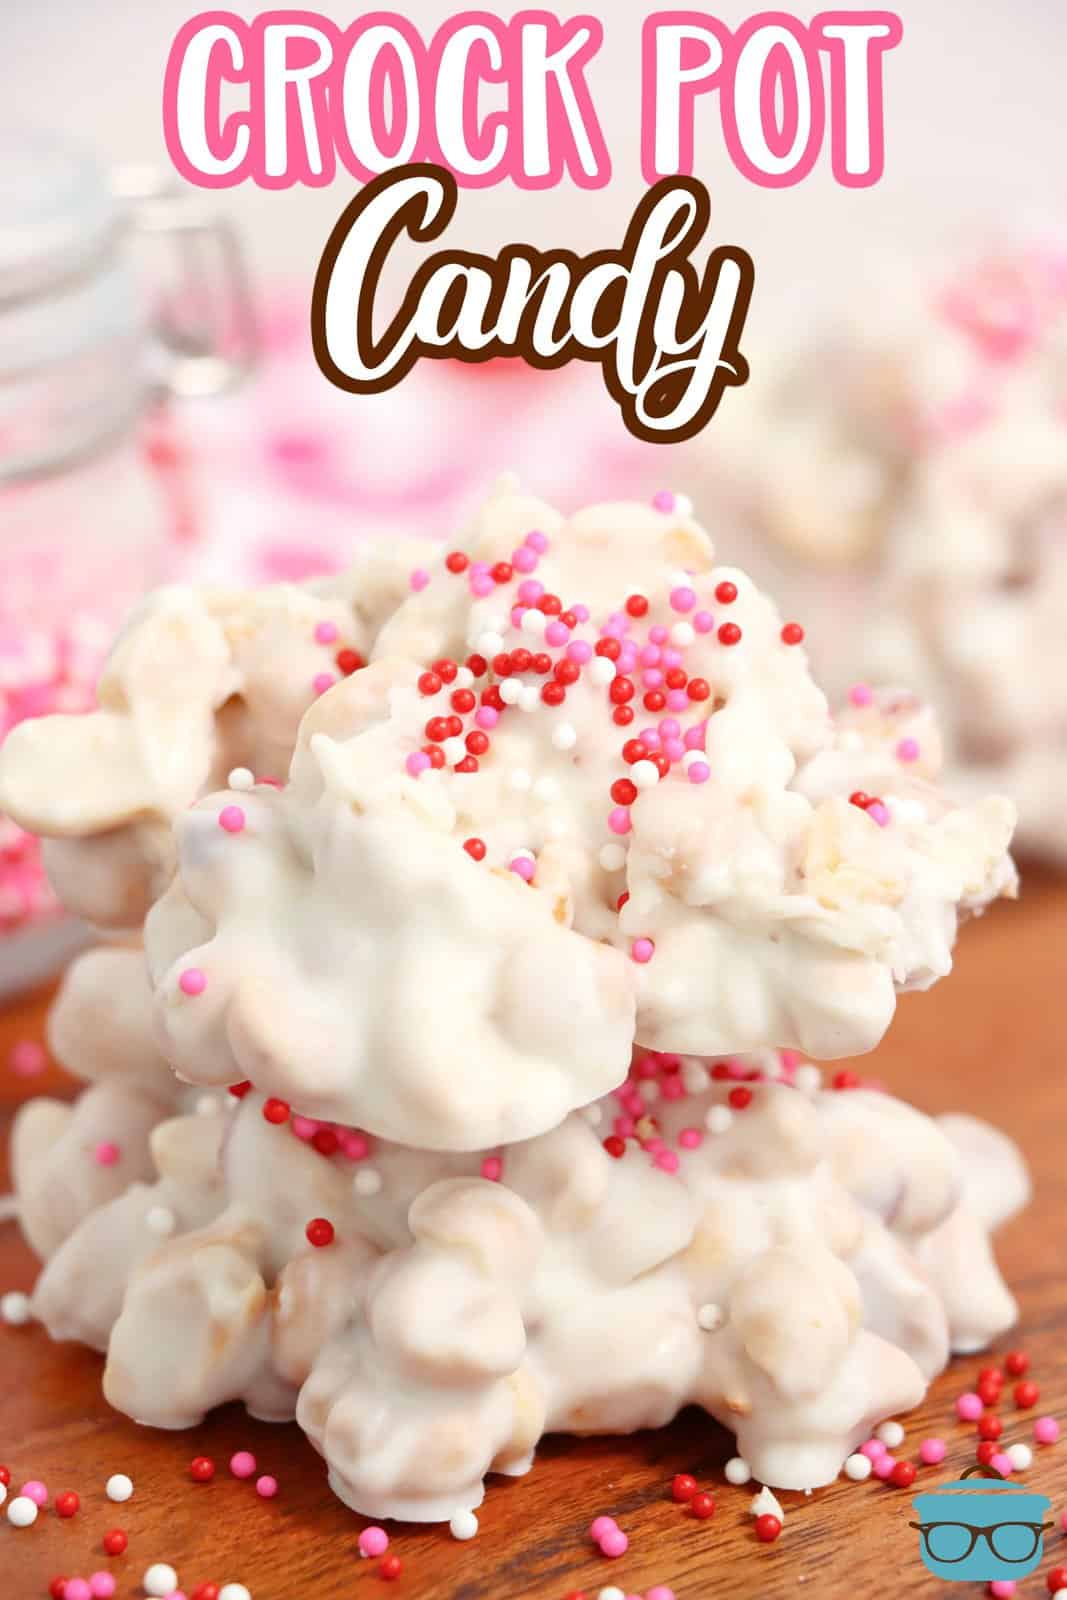 A pile of white crockpot candy with pink sprinkles on it.